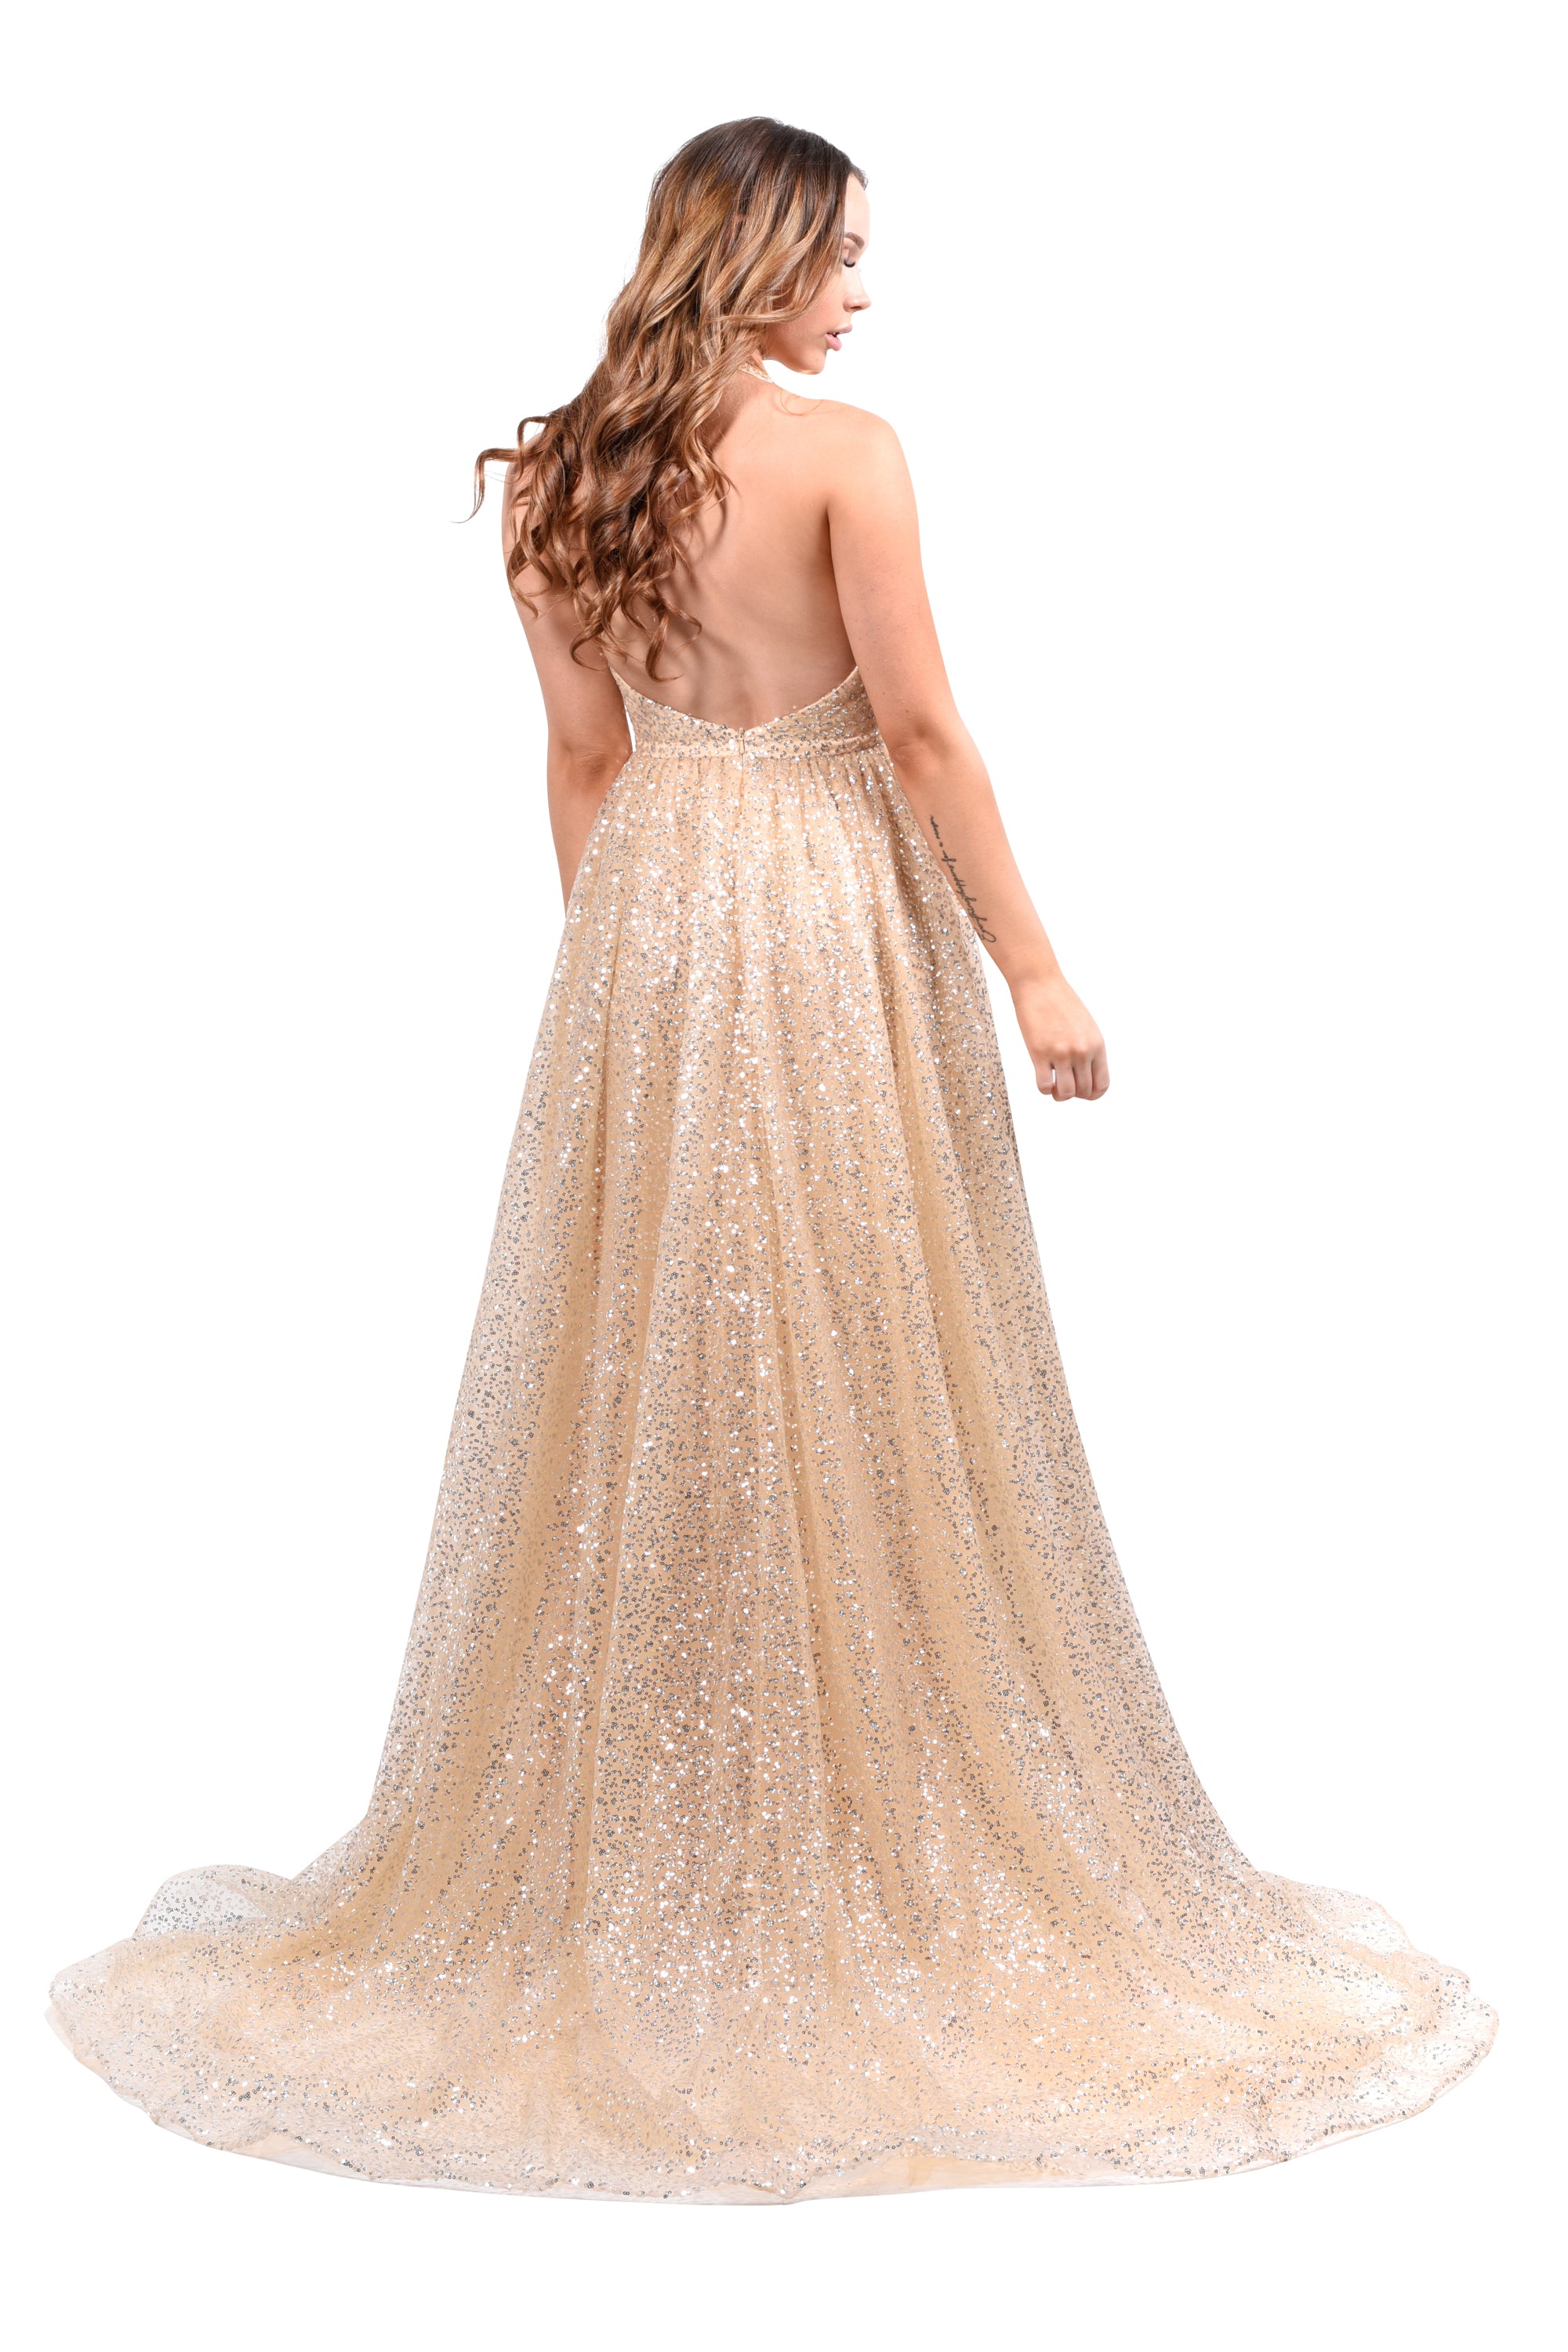 Honey Couture CATALINA Gold Sequin Halter Neck Formal Gown Private Label$ AfterPay Humm ZipPay LayBuy Sezzle